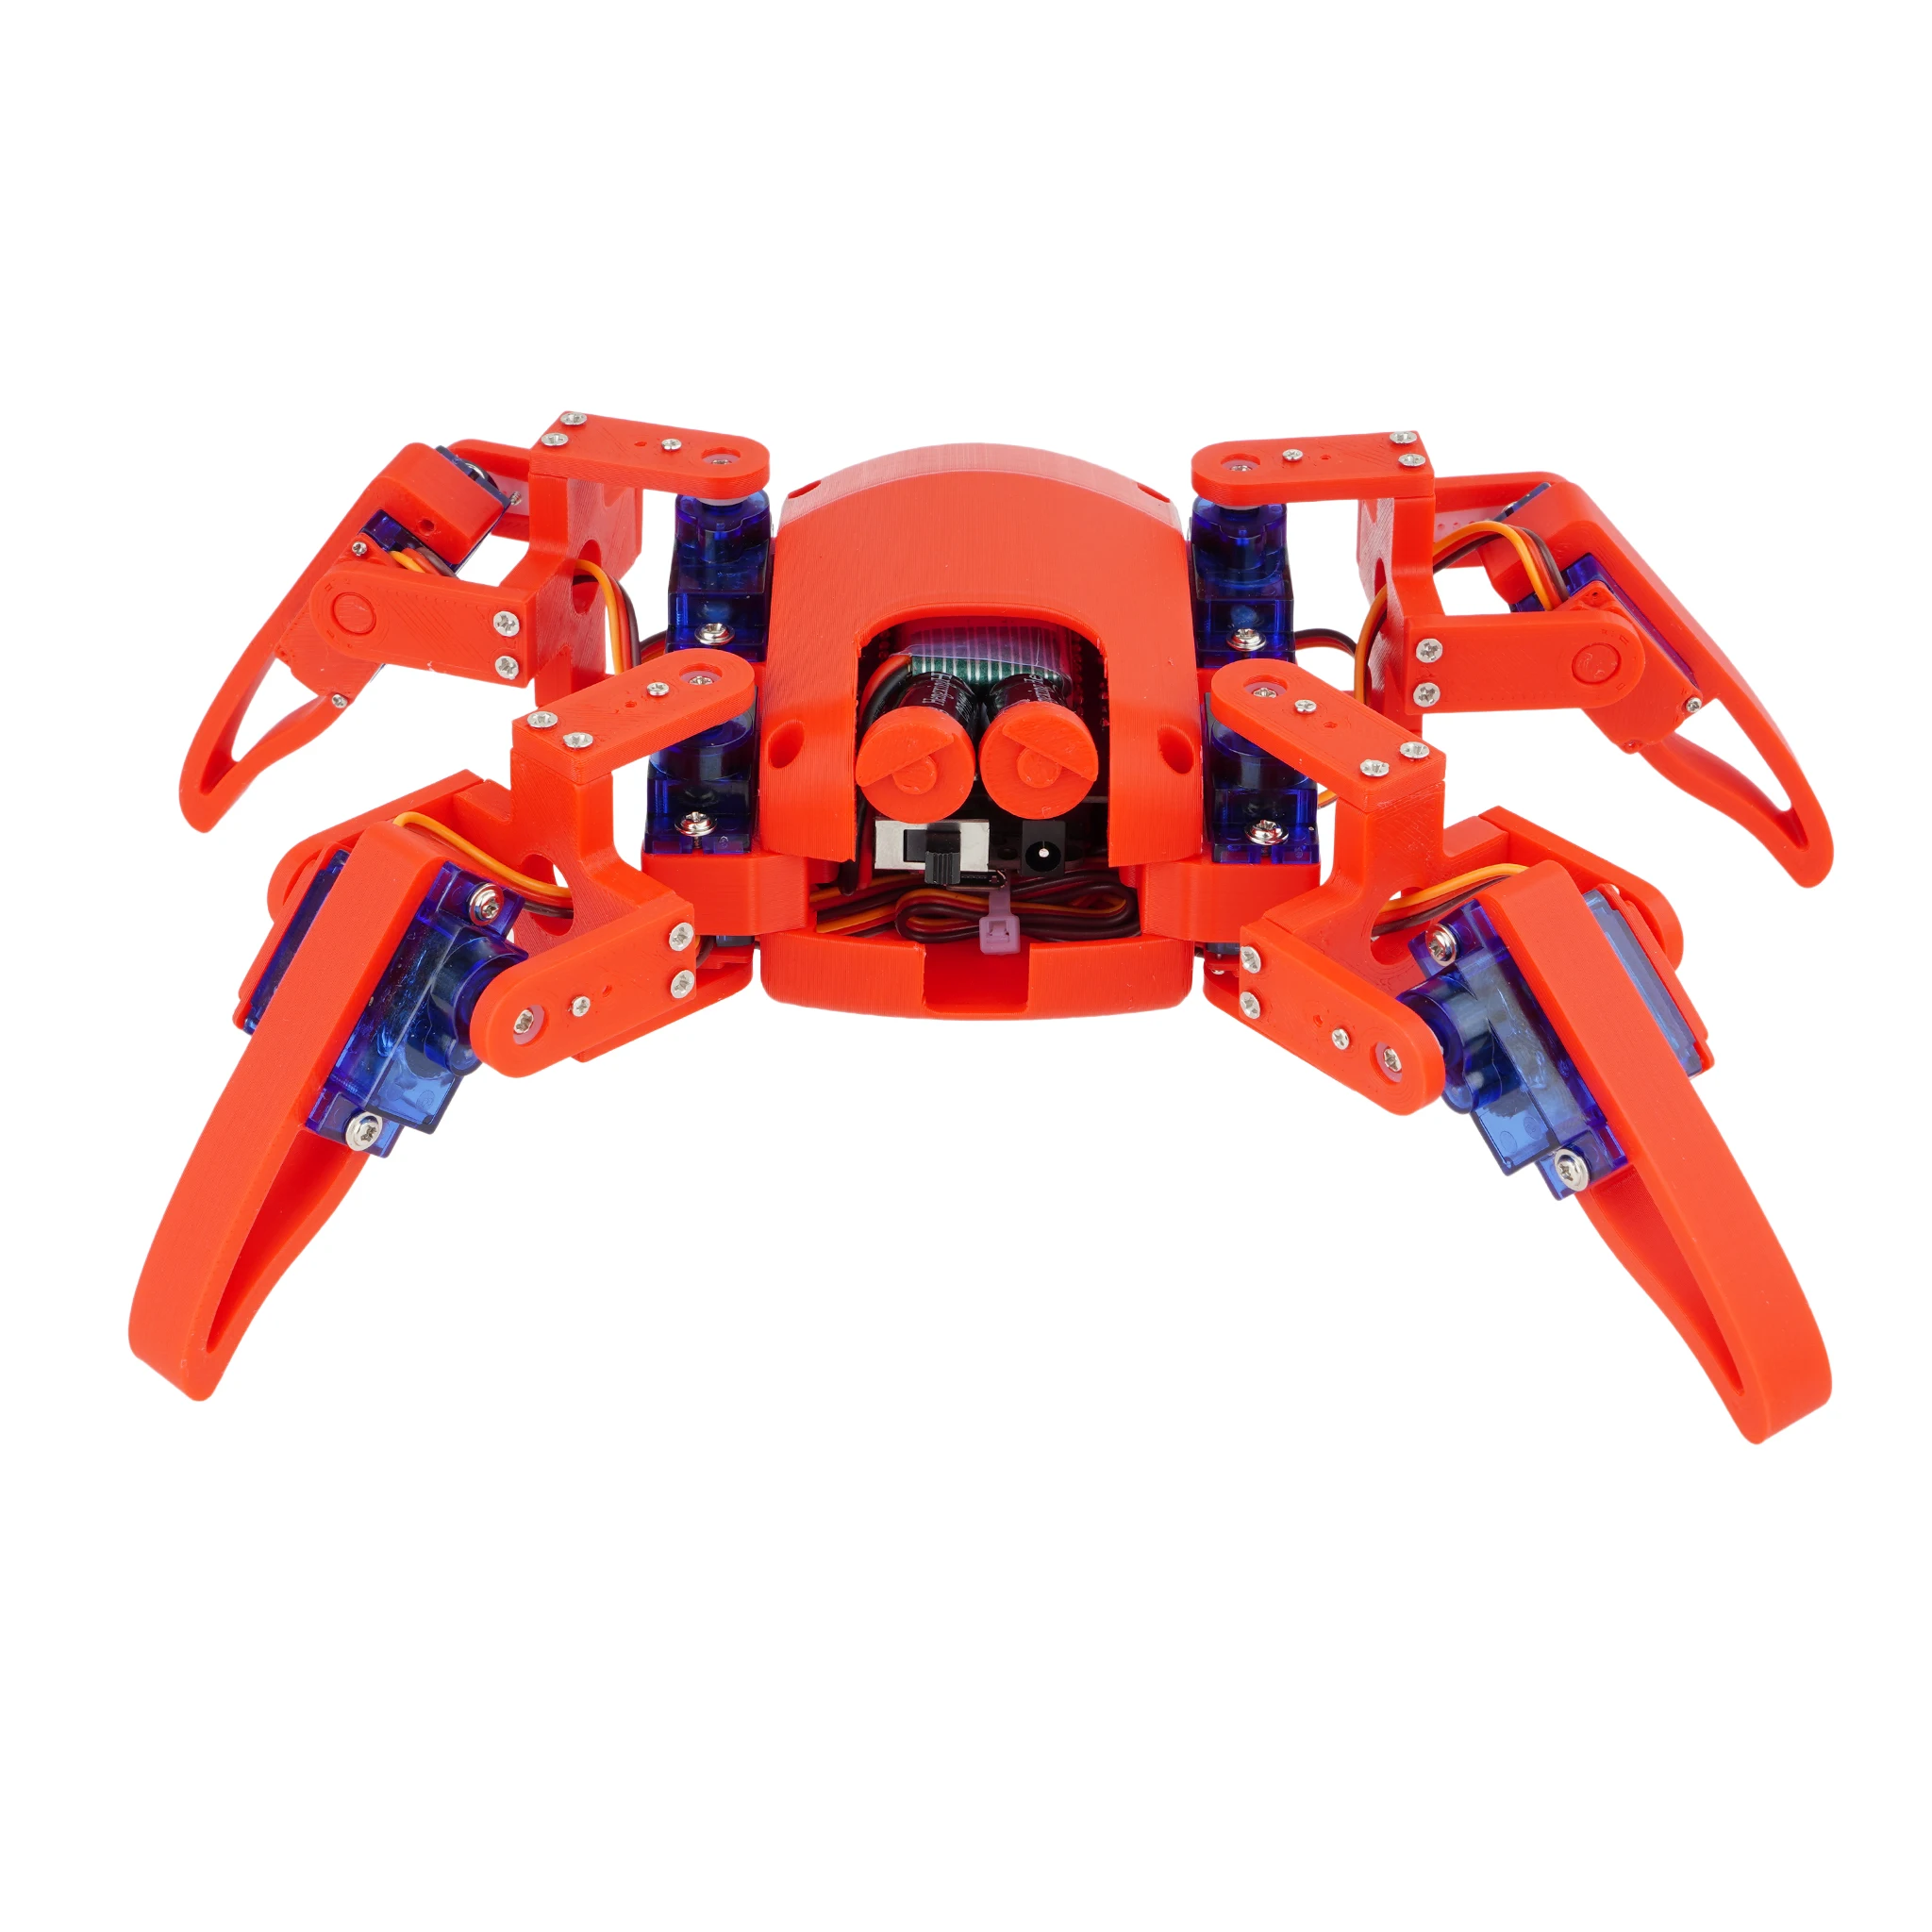 STEAM Educational Quadruped Spider Robot Kit for Arduino, with Speech Remote Control Graphical Programming Toys enlarge